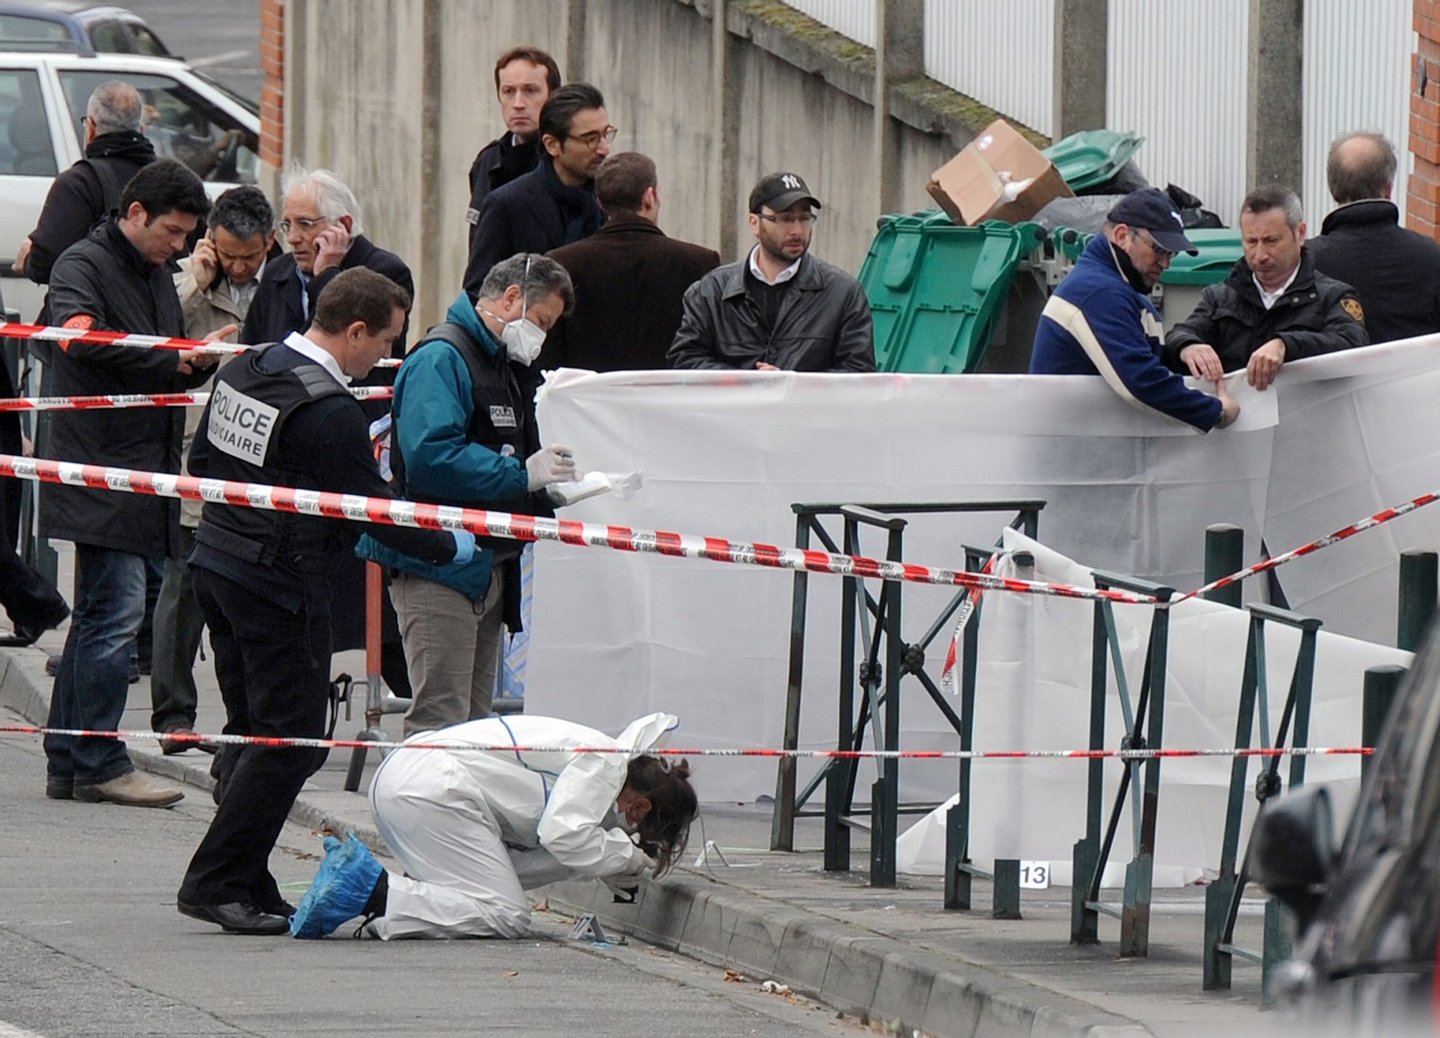 TO GO WITH AFP STORIES A YEAR AFTER MOHAMED MERAH CASE (FILES) - A photo taken on March 19, 2012 shows policemen working near the "Ozar Hatorah" Jewish school, in Toulouse, southwestern France, where four people (three of them children), were killed and two seriously wounded when a gunman opened fire. Mohamed Merah, a self-described Al-Qaeda sympathiser, shot a rabbi, three Jewish schoolchildren and three French paratroopers in attacks in and around the southern city of Toulouse in March 2012 before being shot dead in a police siege. AFP PHOTO / ERIC CABANIS (Photo credit should read ERIC CABANIS/AFP/Getty Images)